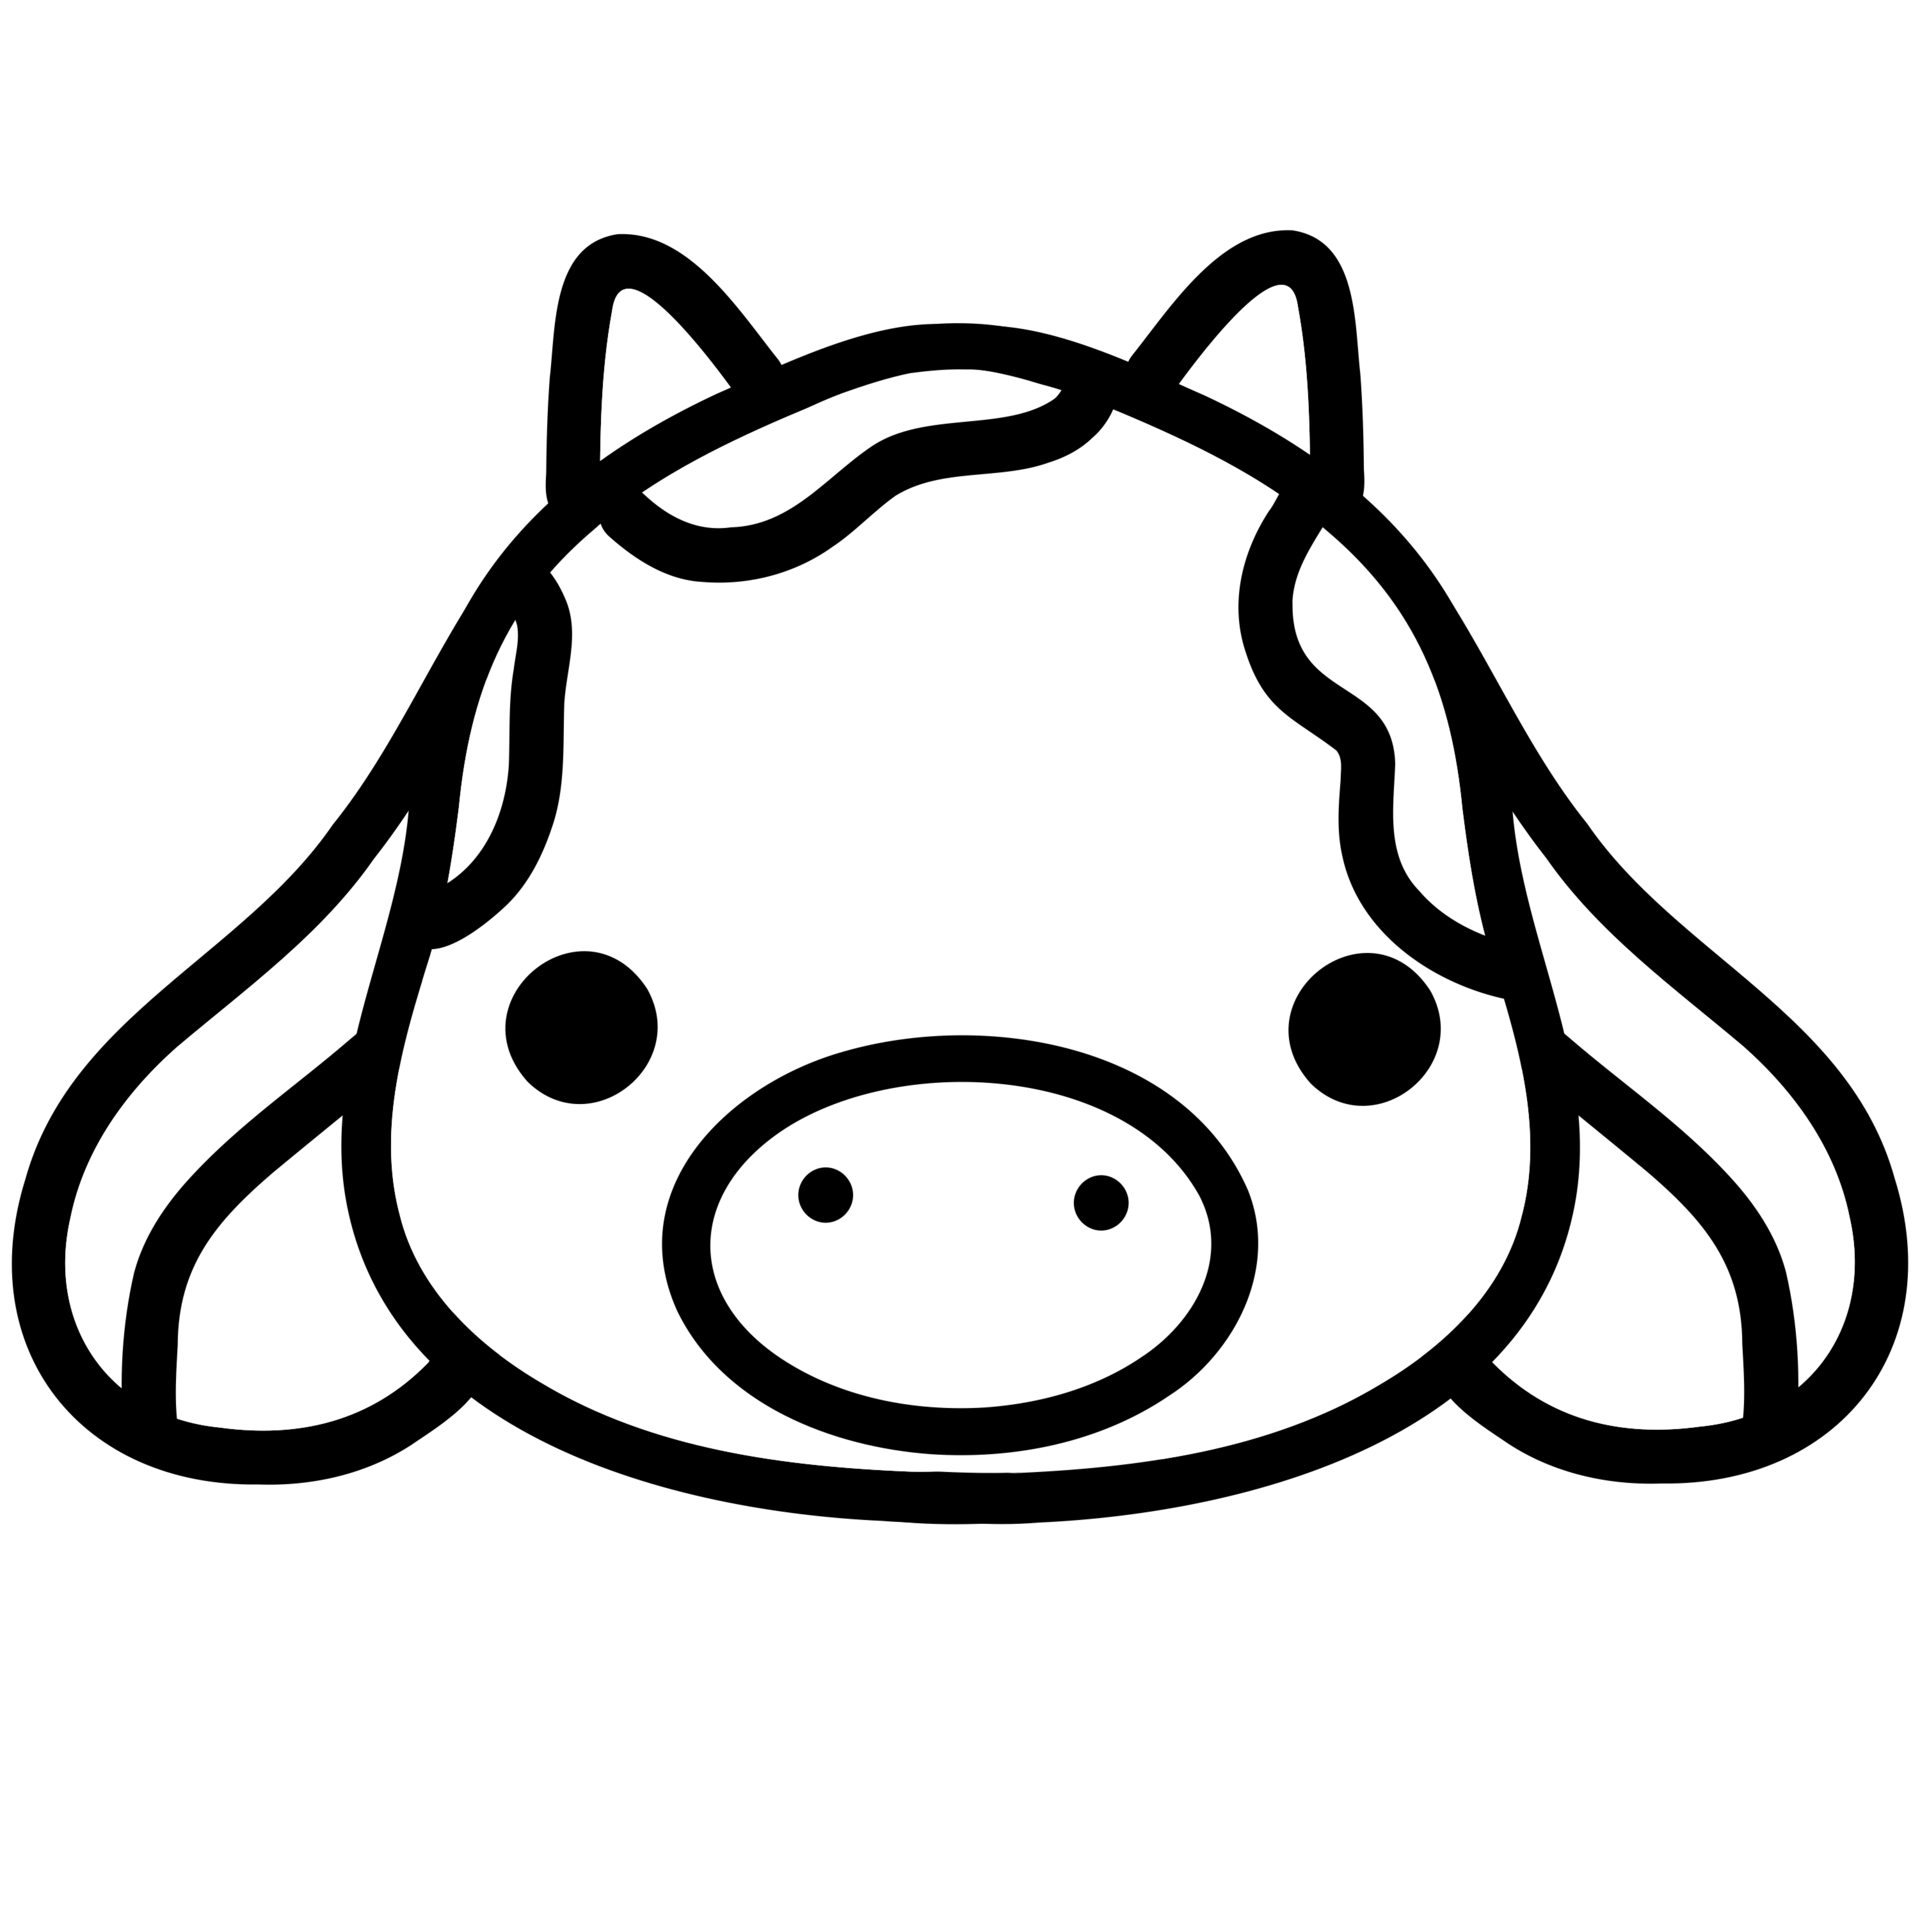 Cute cow, cow illustration, baby cow, animal illustration 21276980 PNG